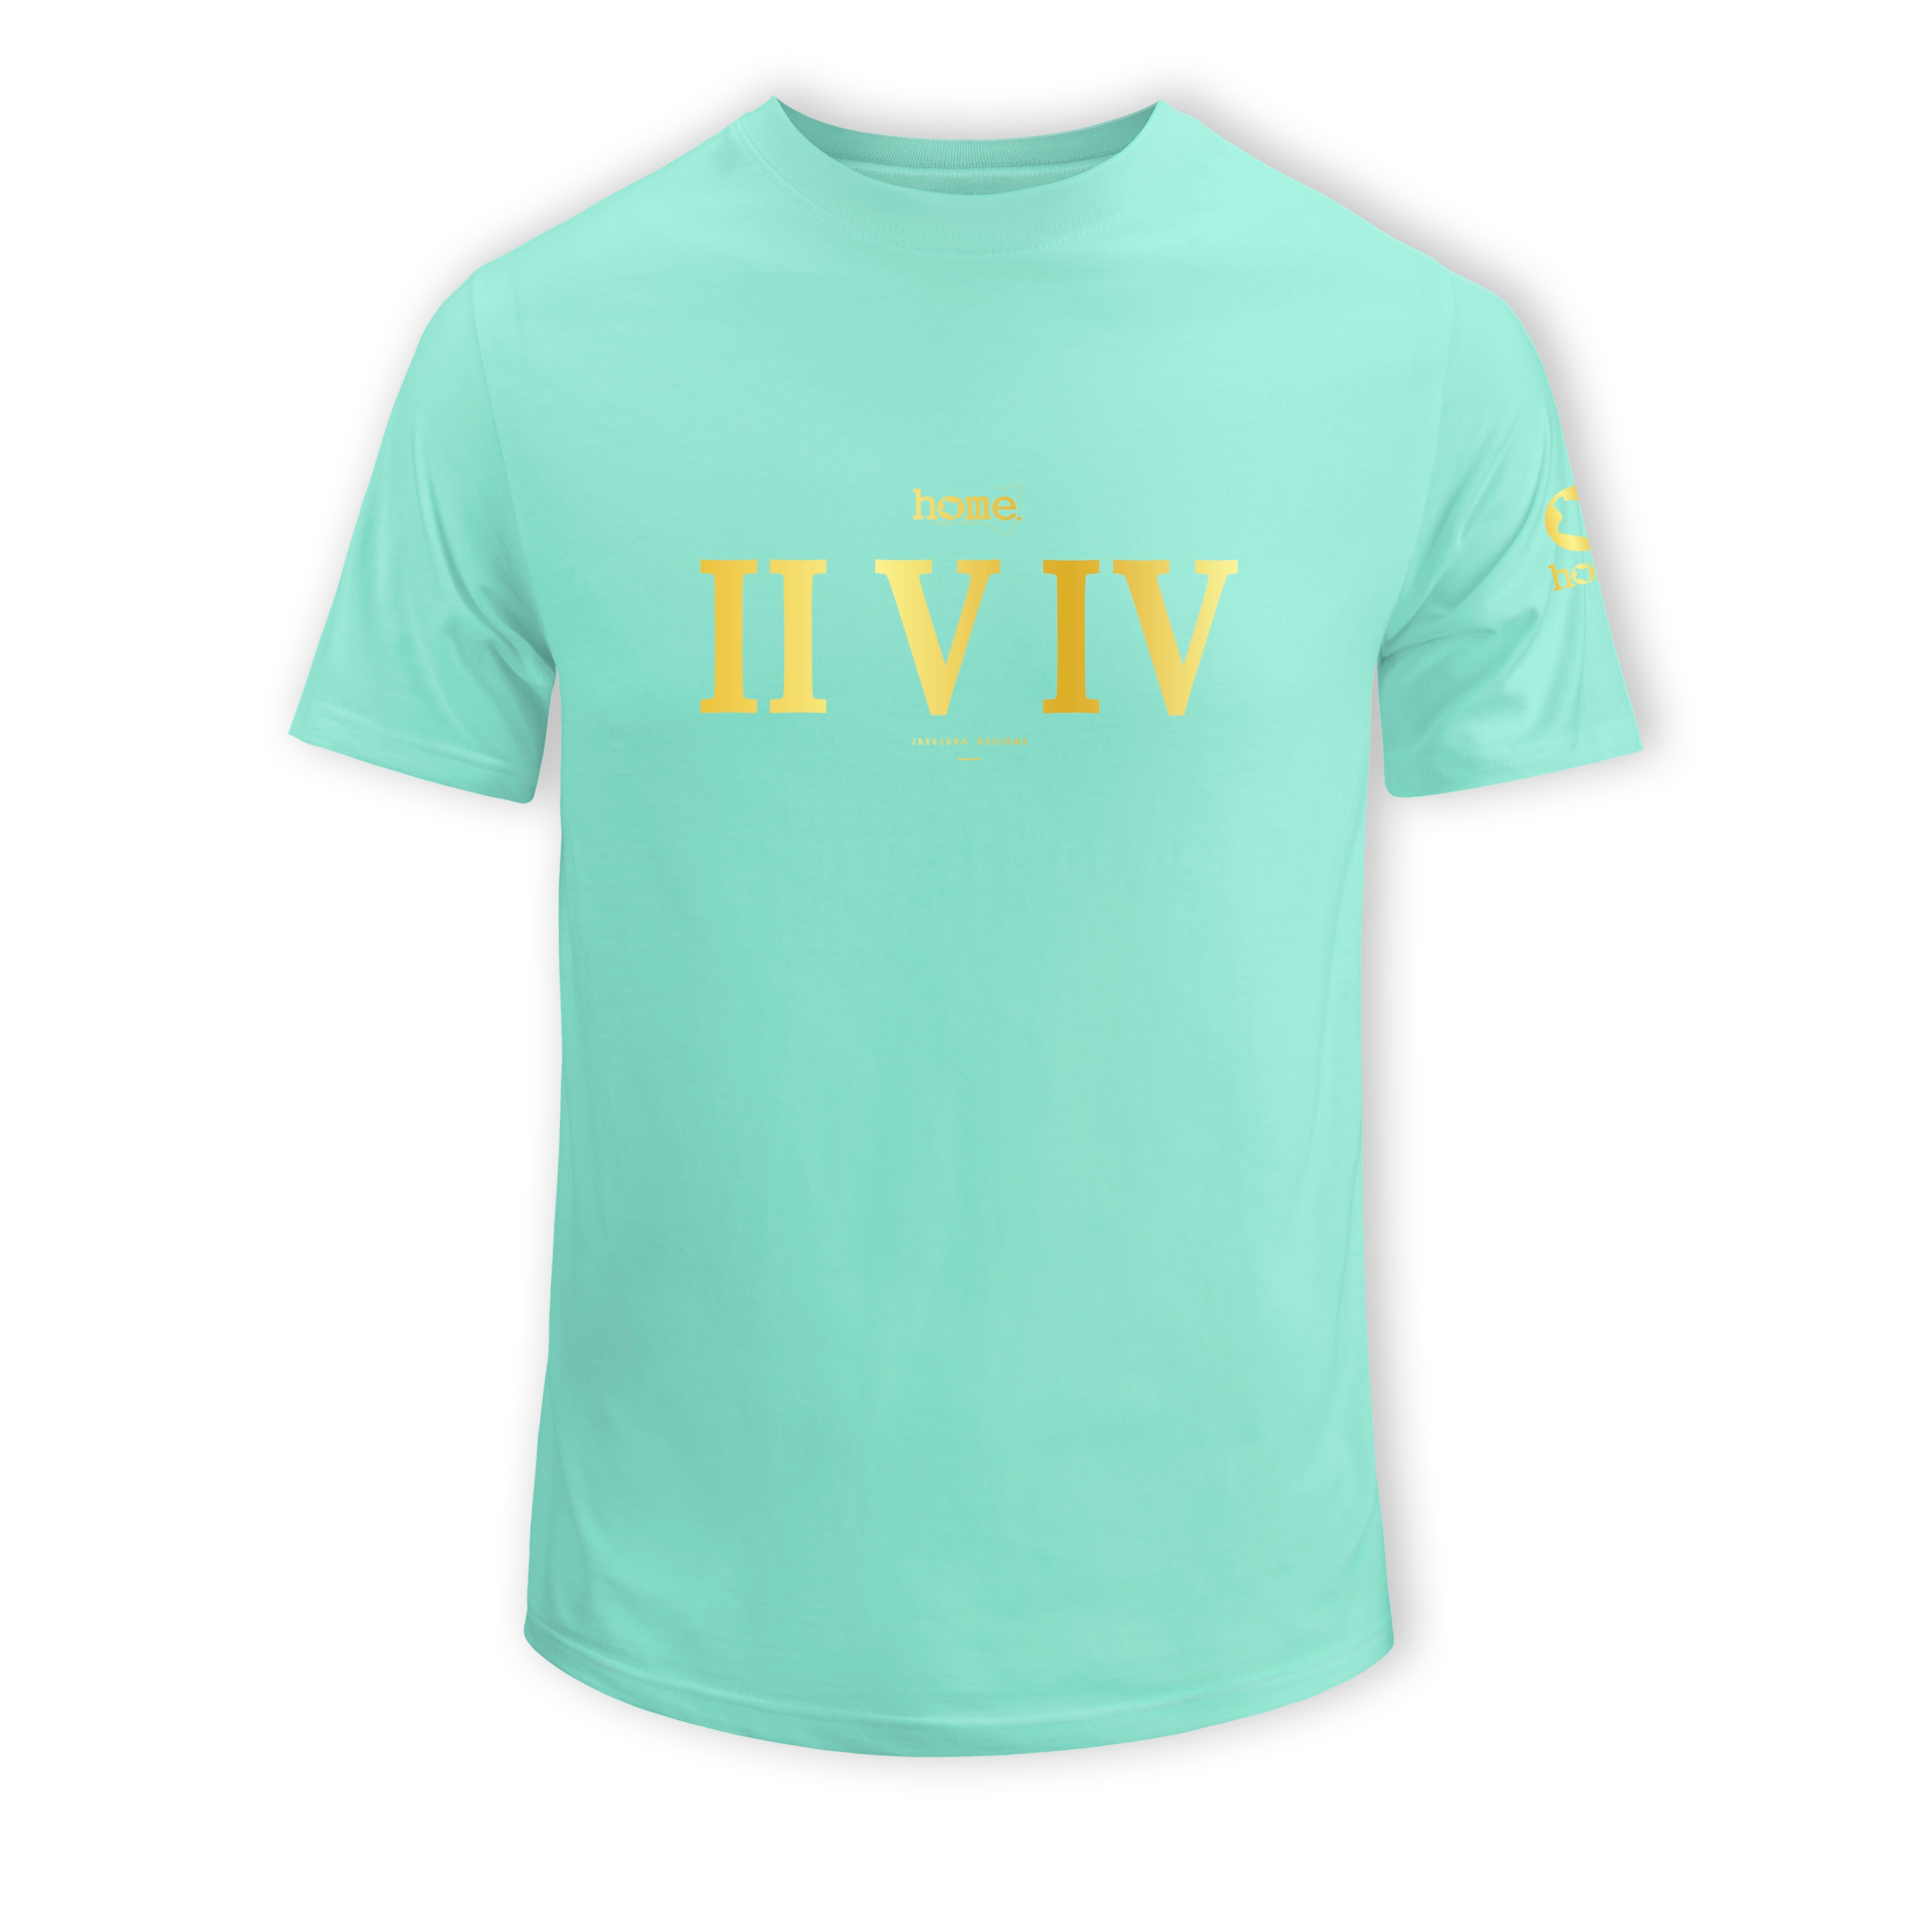 home_254 KIDS SHORT-SLEEVED TURQUOISE GREEN T-SHIRT WITH A GOLD ROMAN NUMERALS PRINT – COTTON PLUS FABRIC